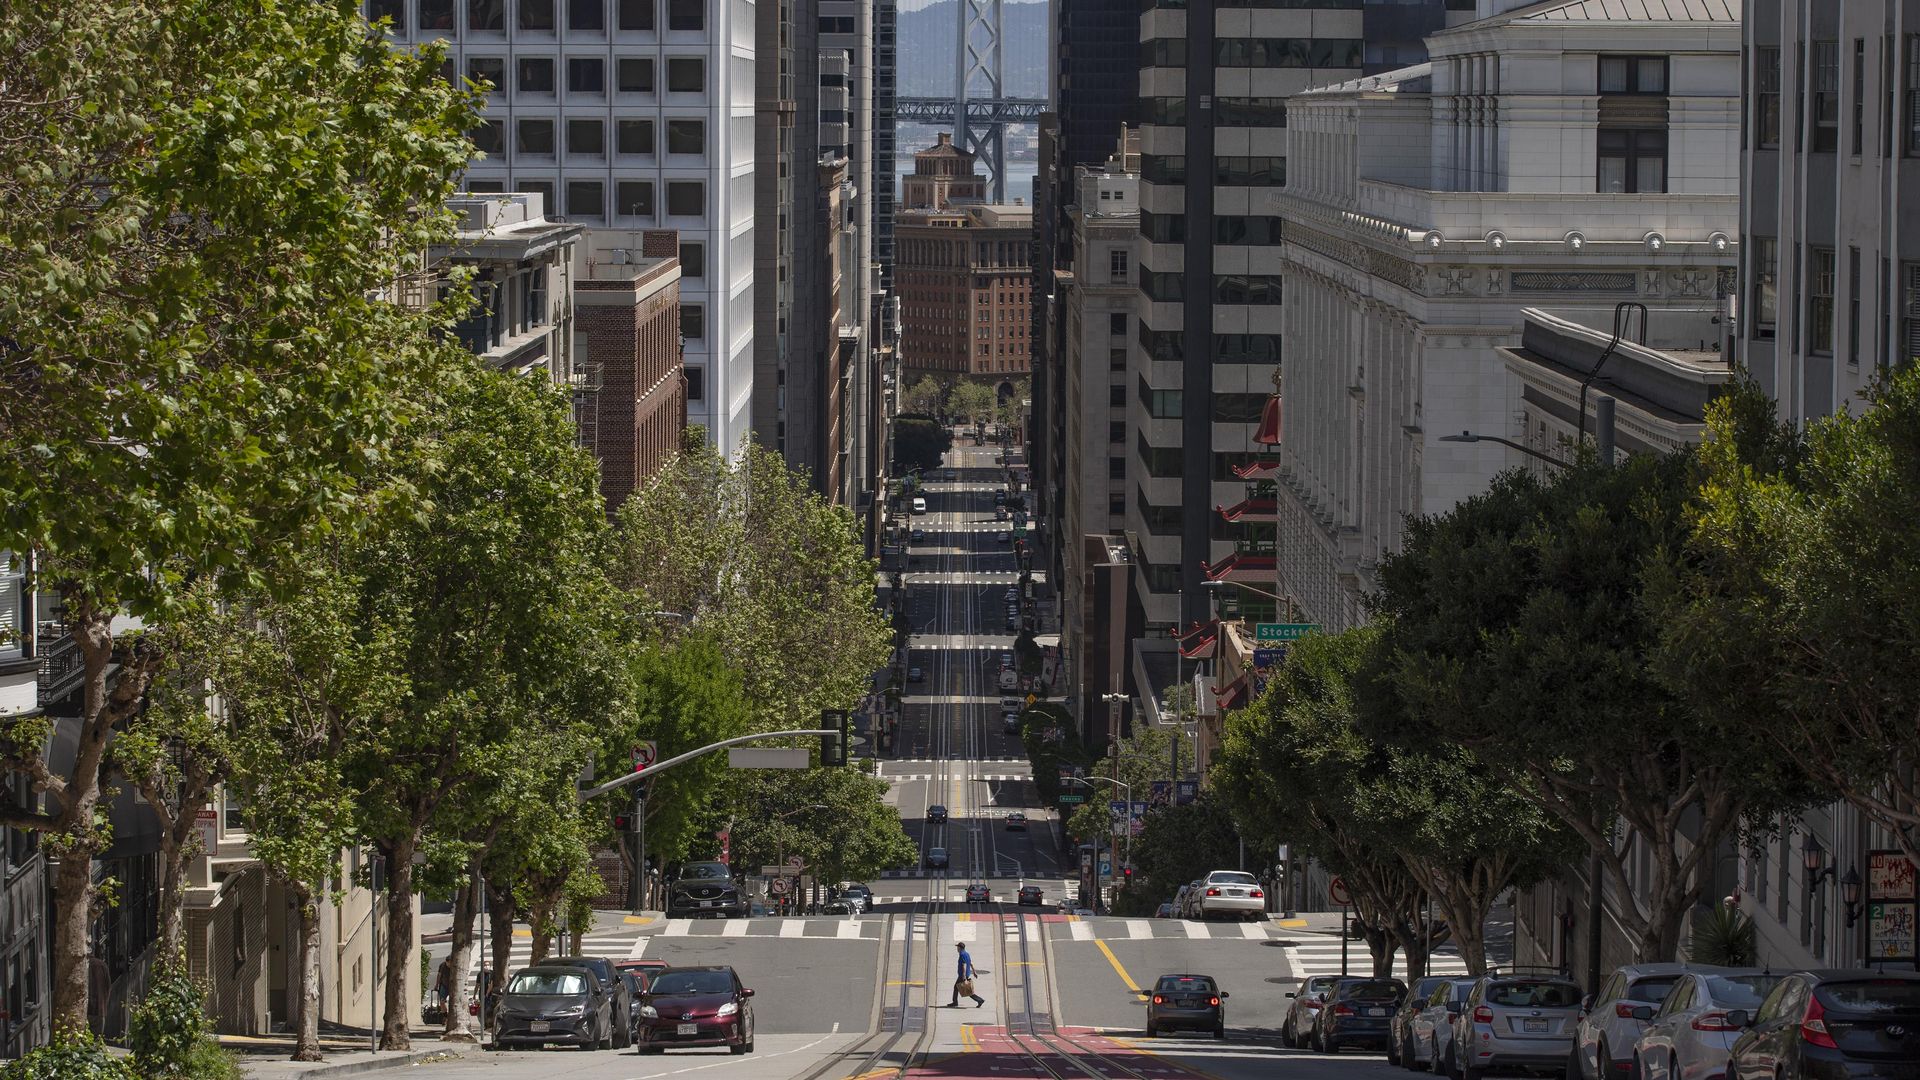 A man crosses an empty street in San Fransisco amid the coronavirus outbreak in April 2020